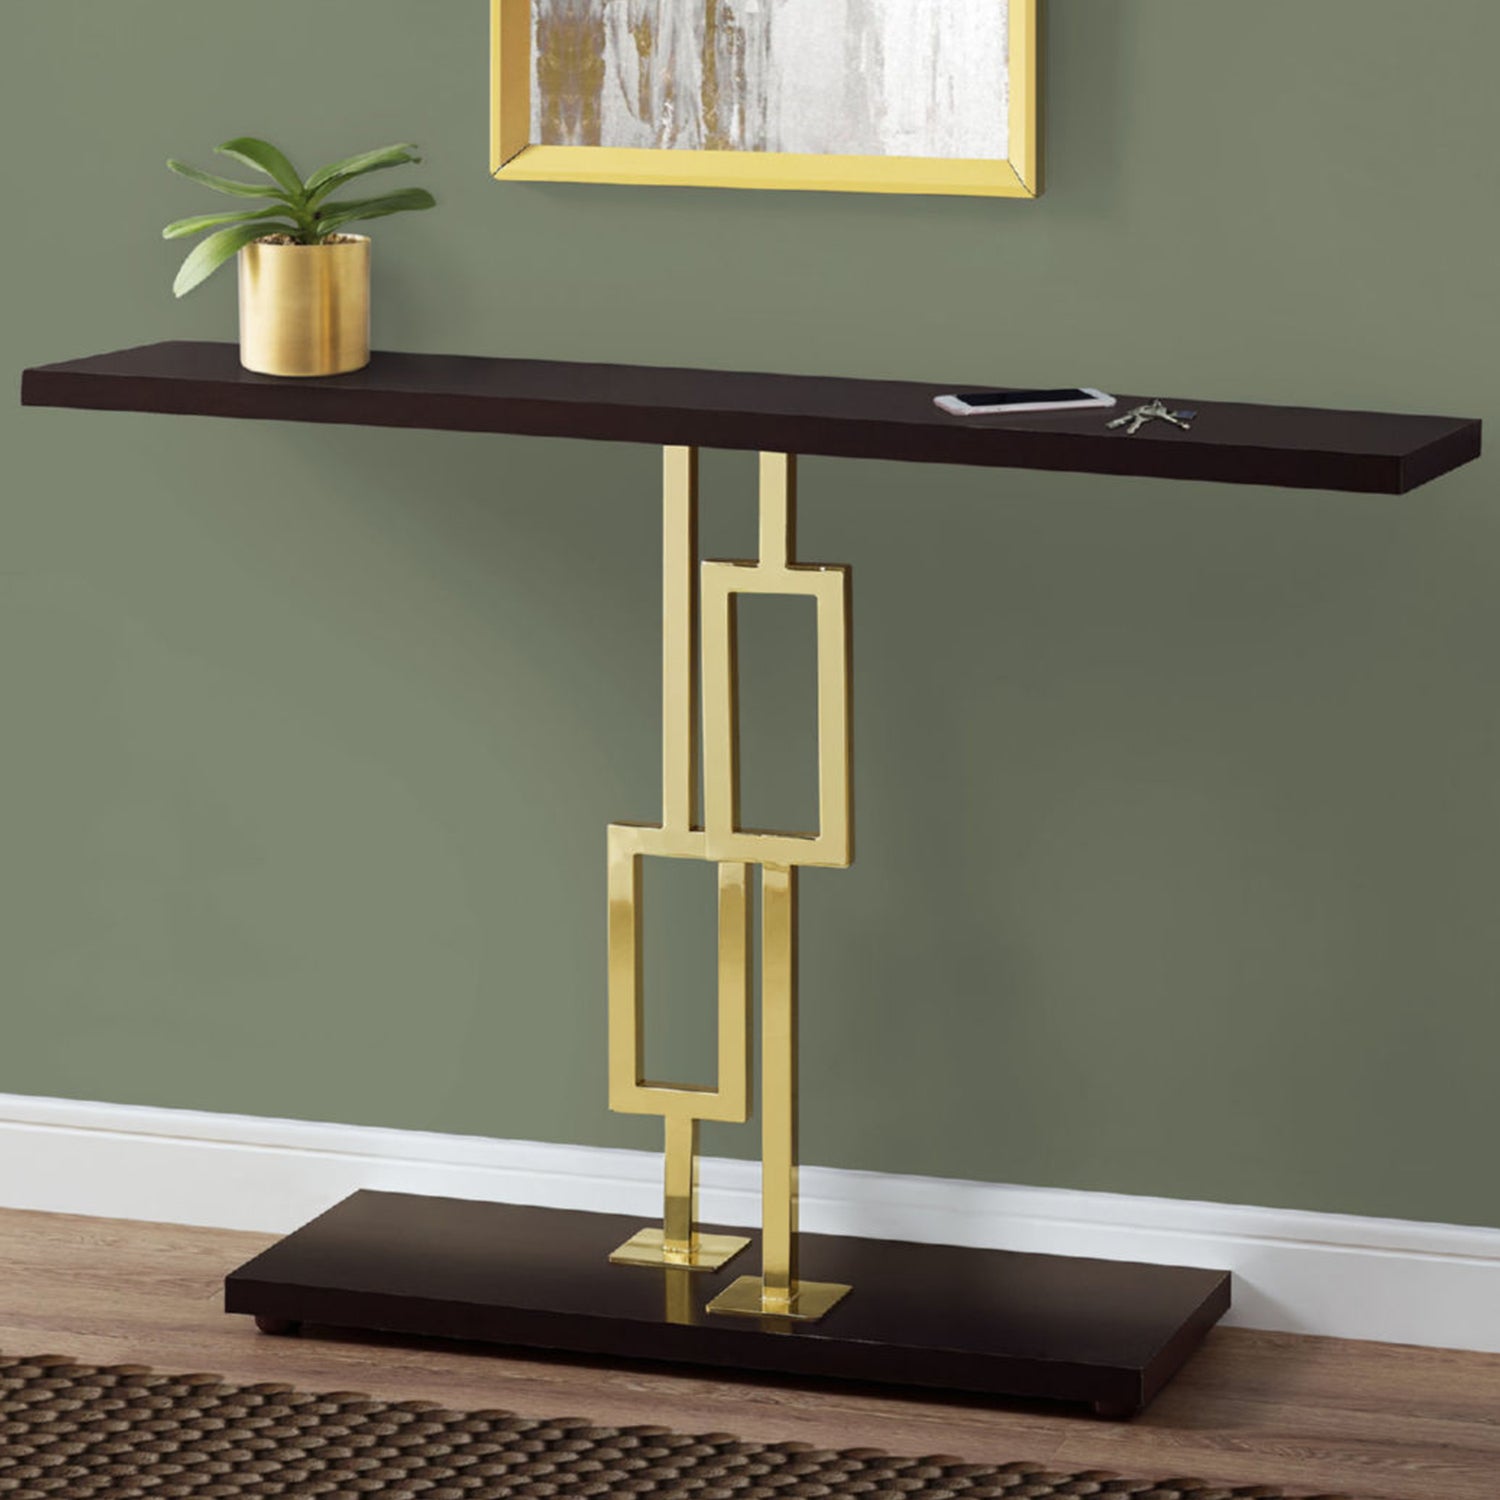 47" Brown Floor Shelf Console Table With Storage